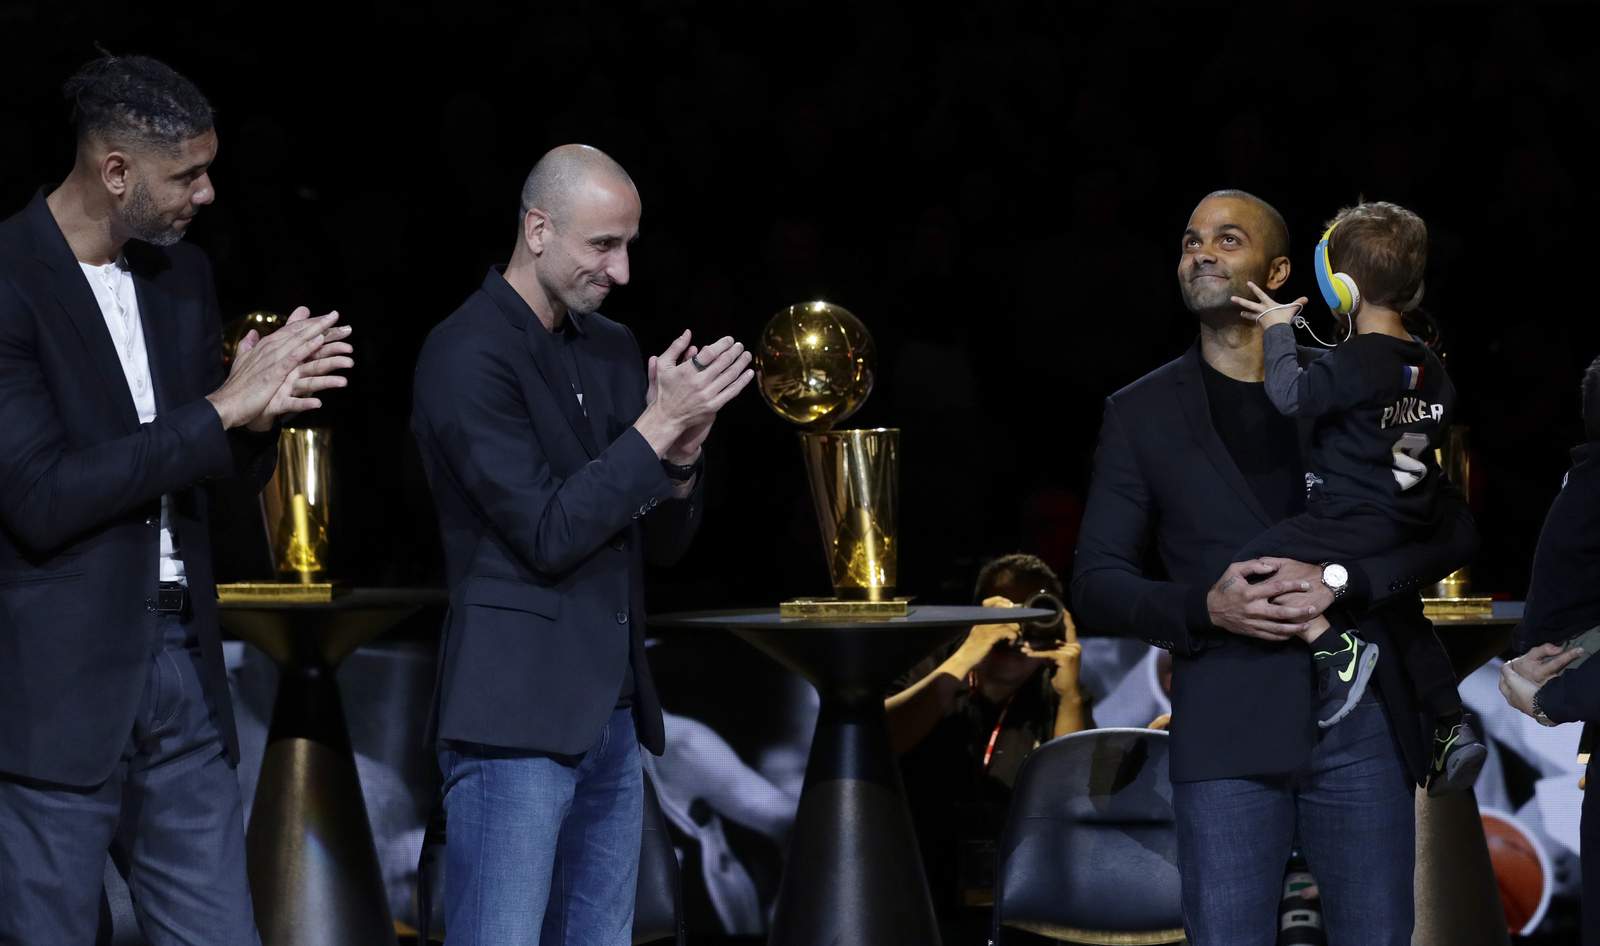 Tony Parker documentary heads to Netflix, features interviews with Tim Duncan, Kobe Bryant, other NBA greats